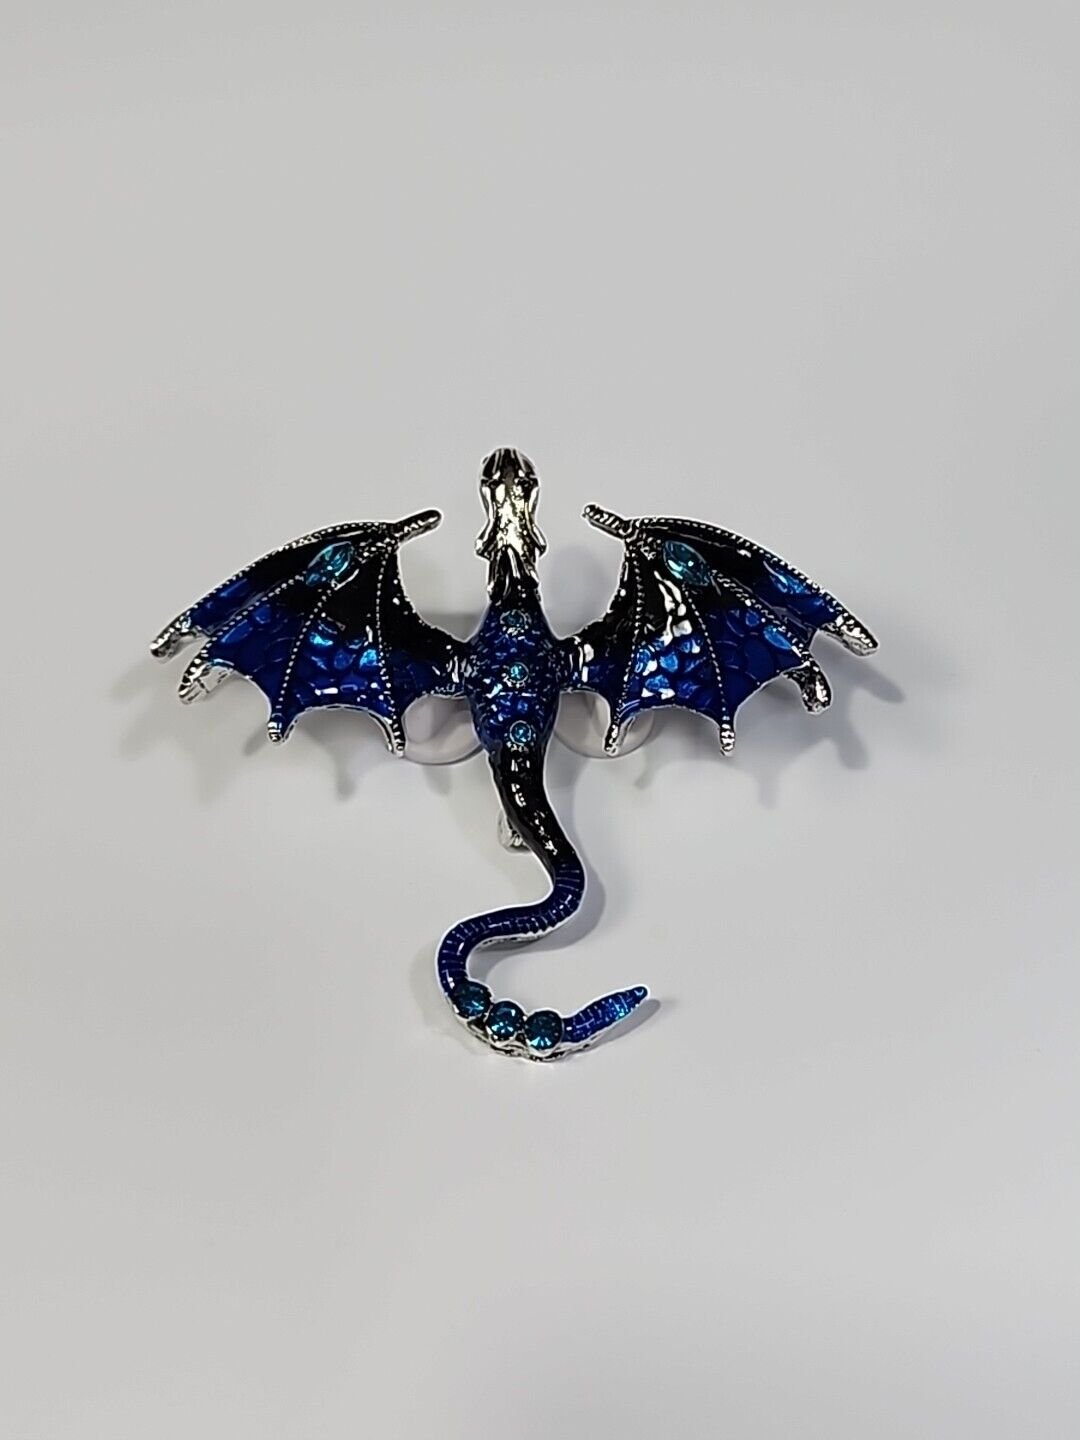 Dragon Brooch Pin Pendant Blue with Faceted Faux Gems Crystals Sparkly *